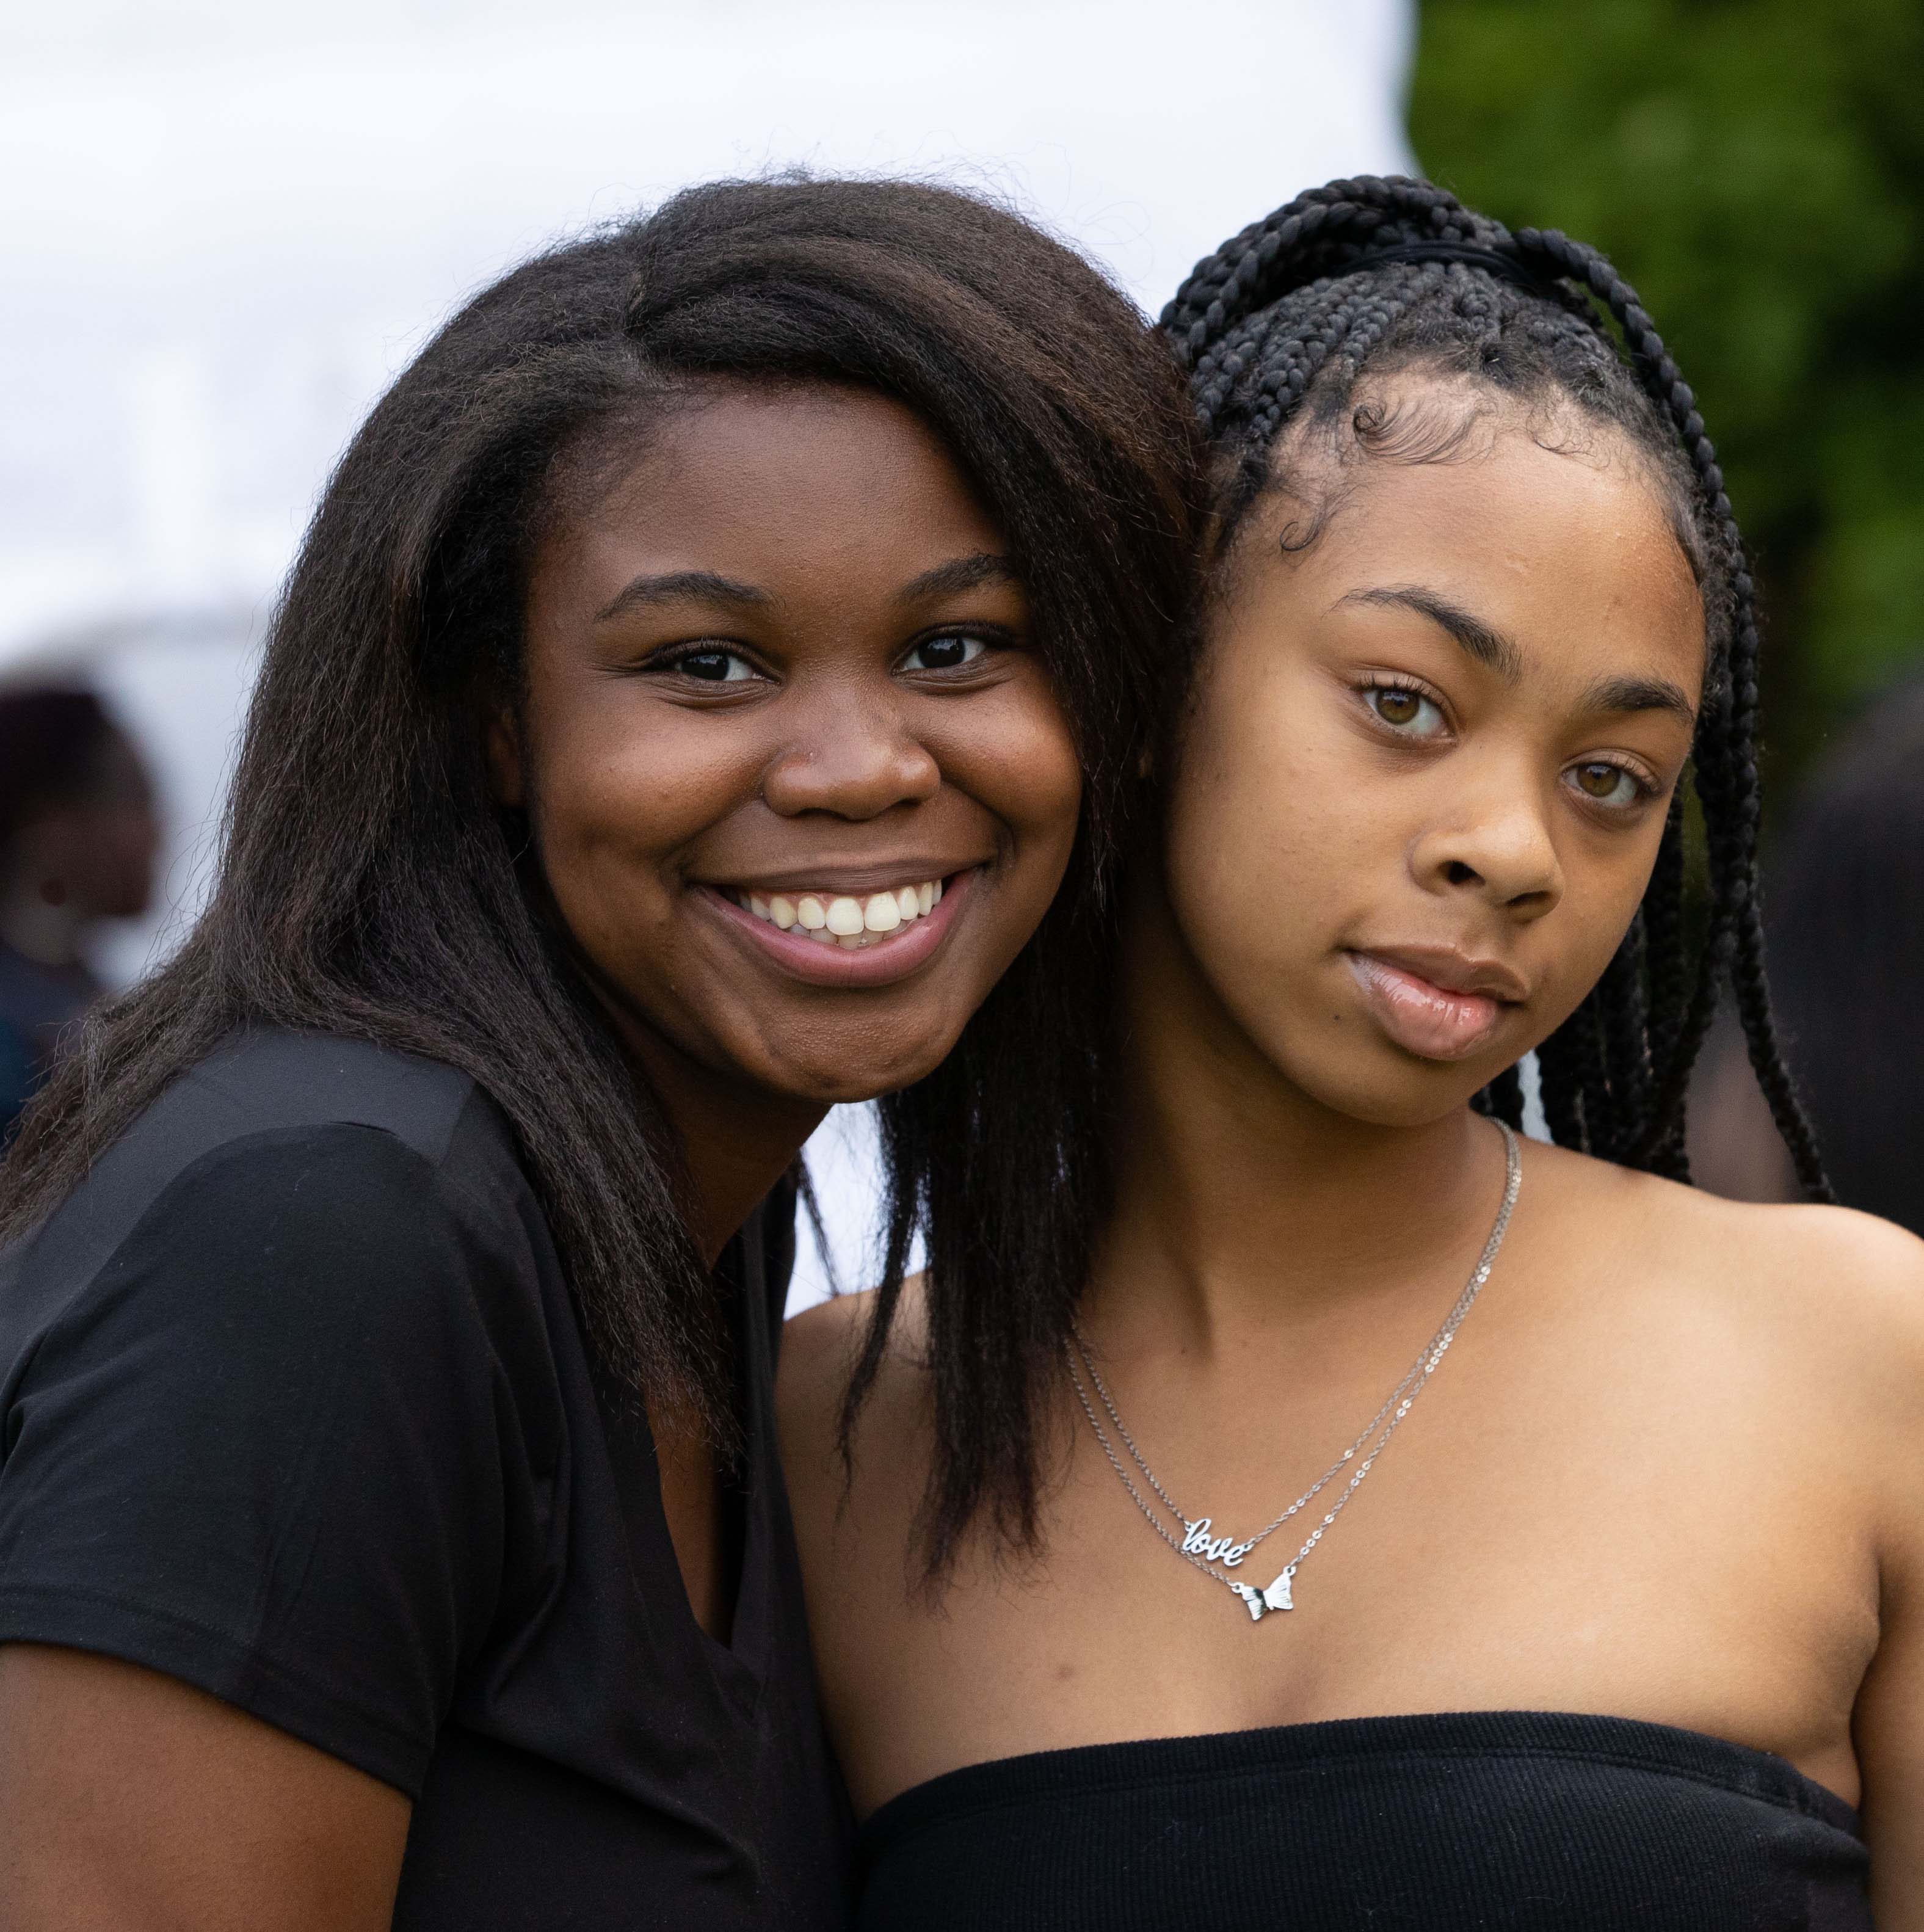 Two female African American students